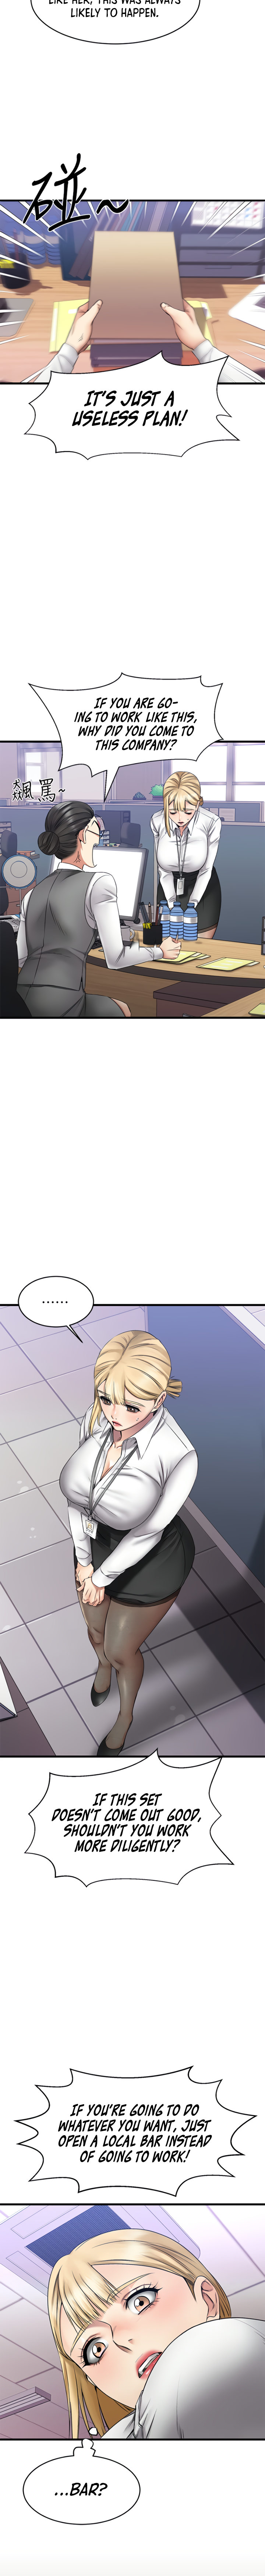 My Female Friend Who Crossed The Line - Chapter 4 Page 11